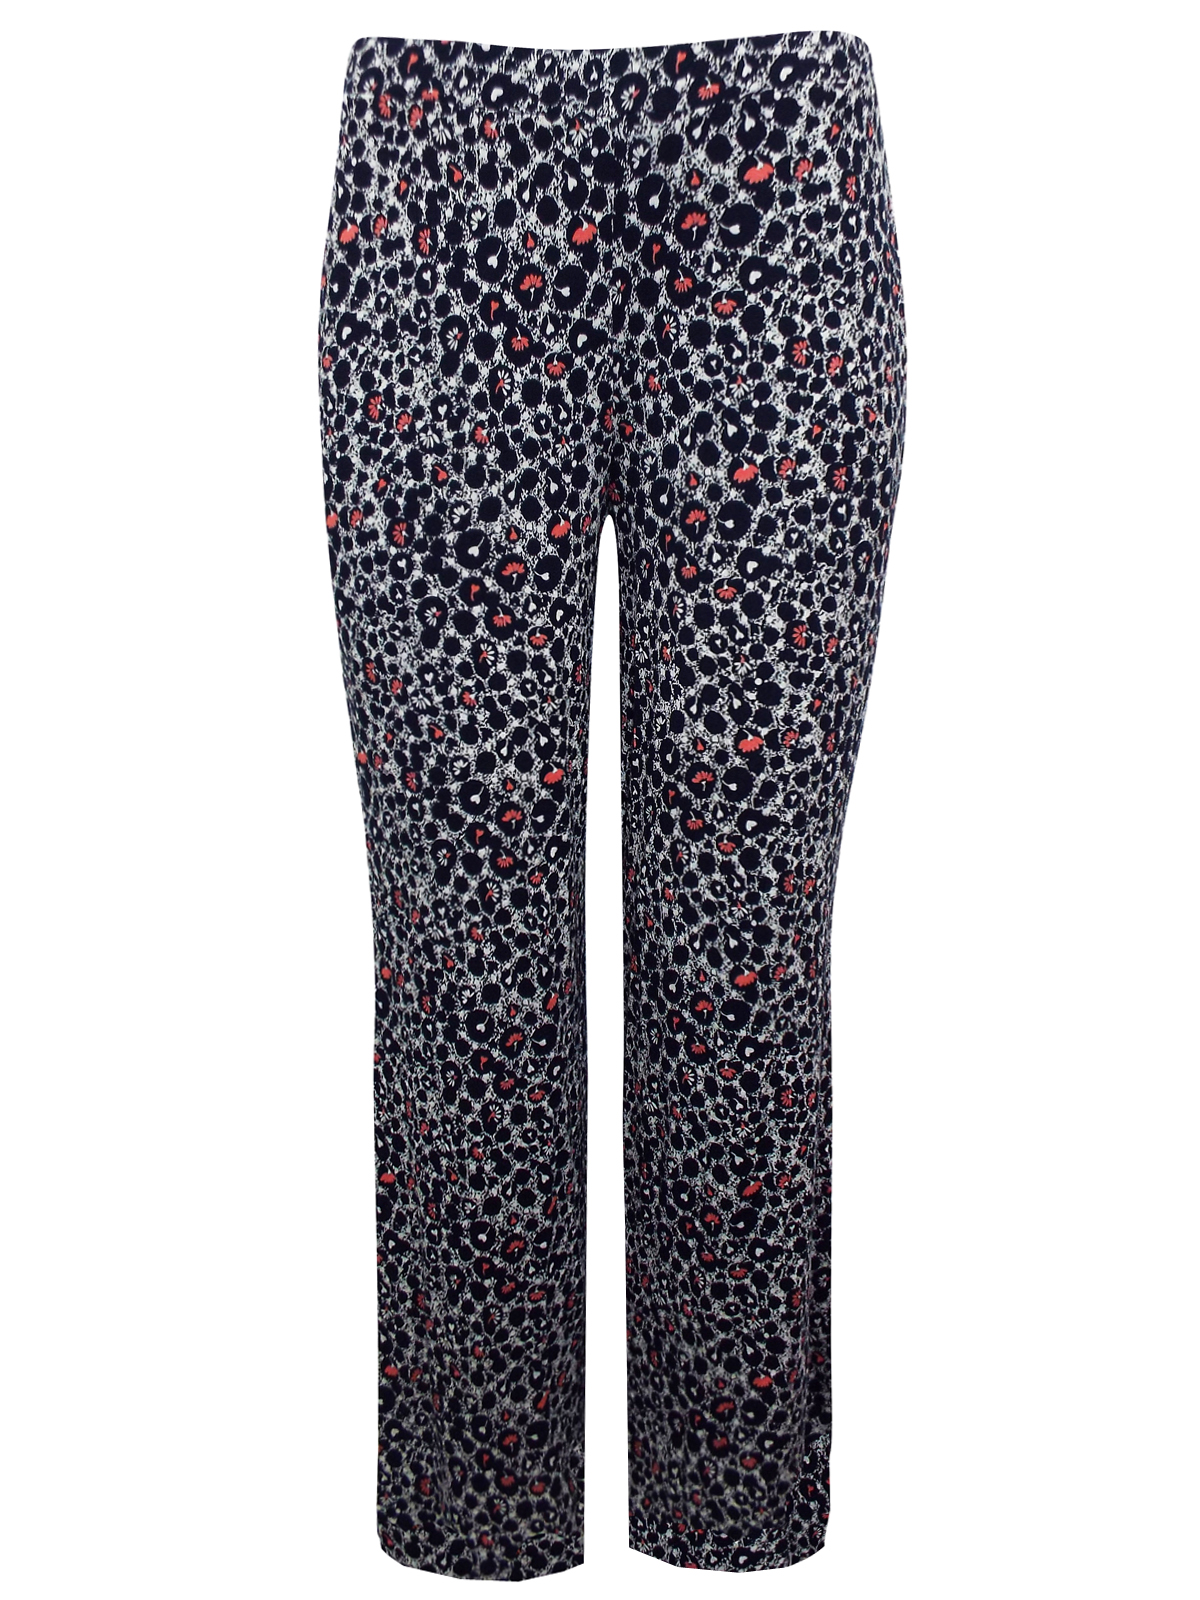 Marks and Spencer - - M&5 ASSORTED Ladies Trousers - Size 6 to 22